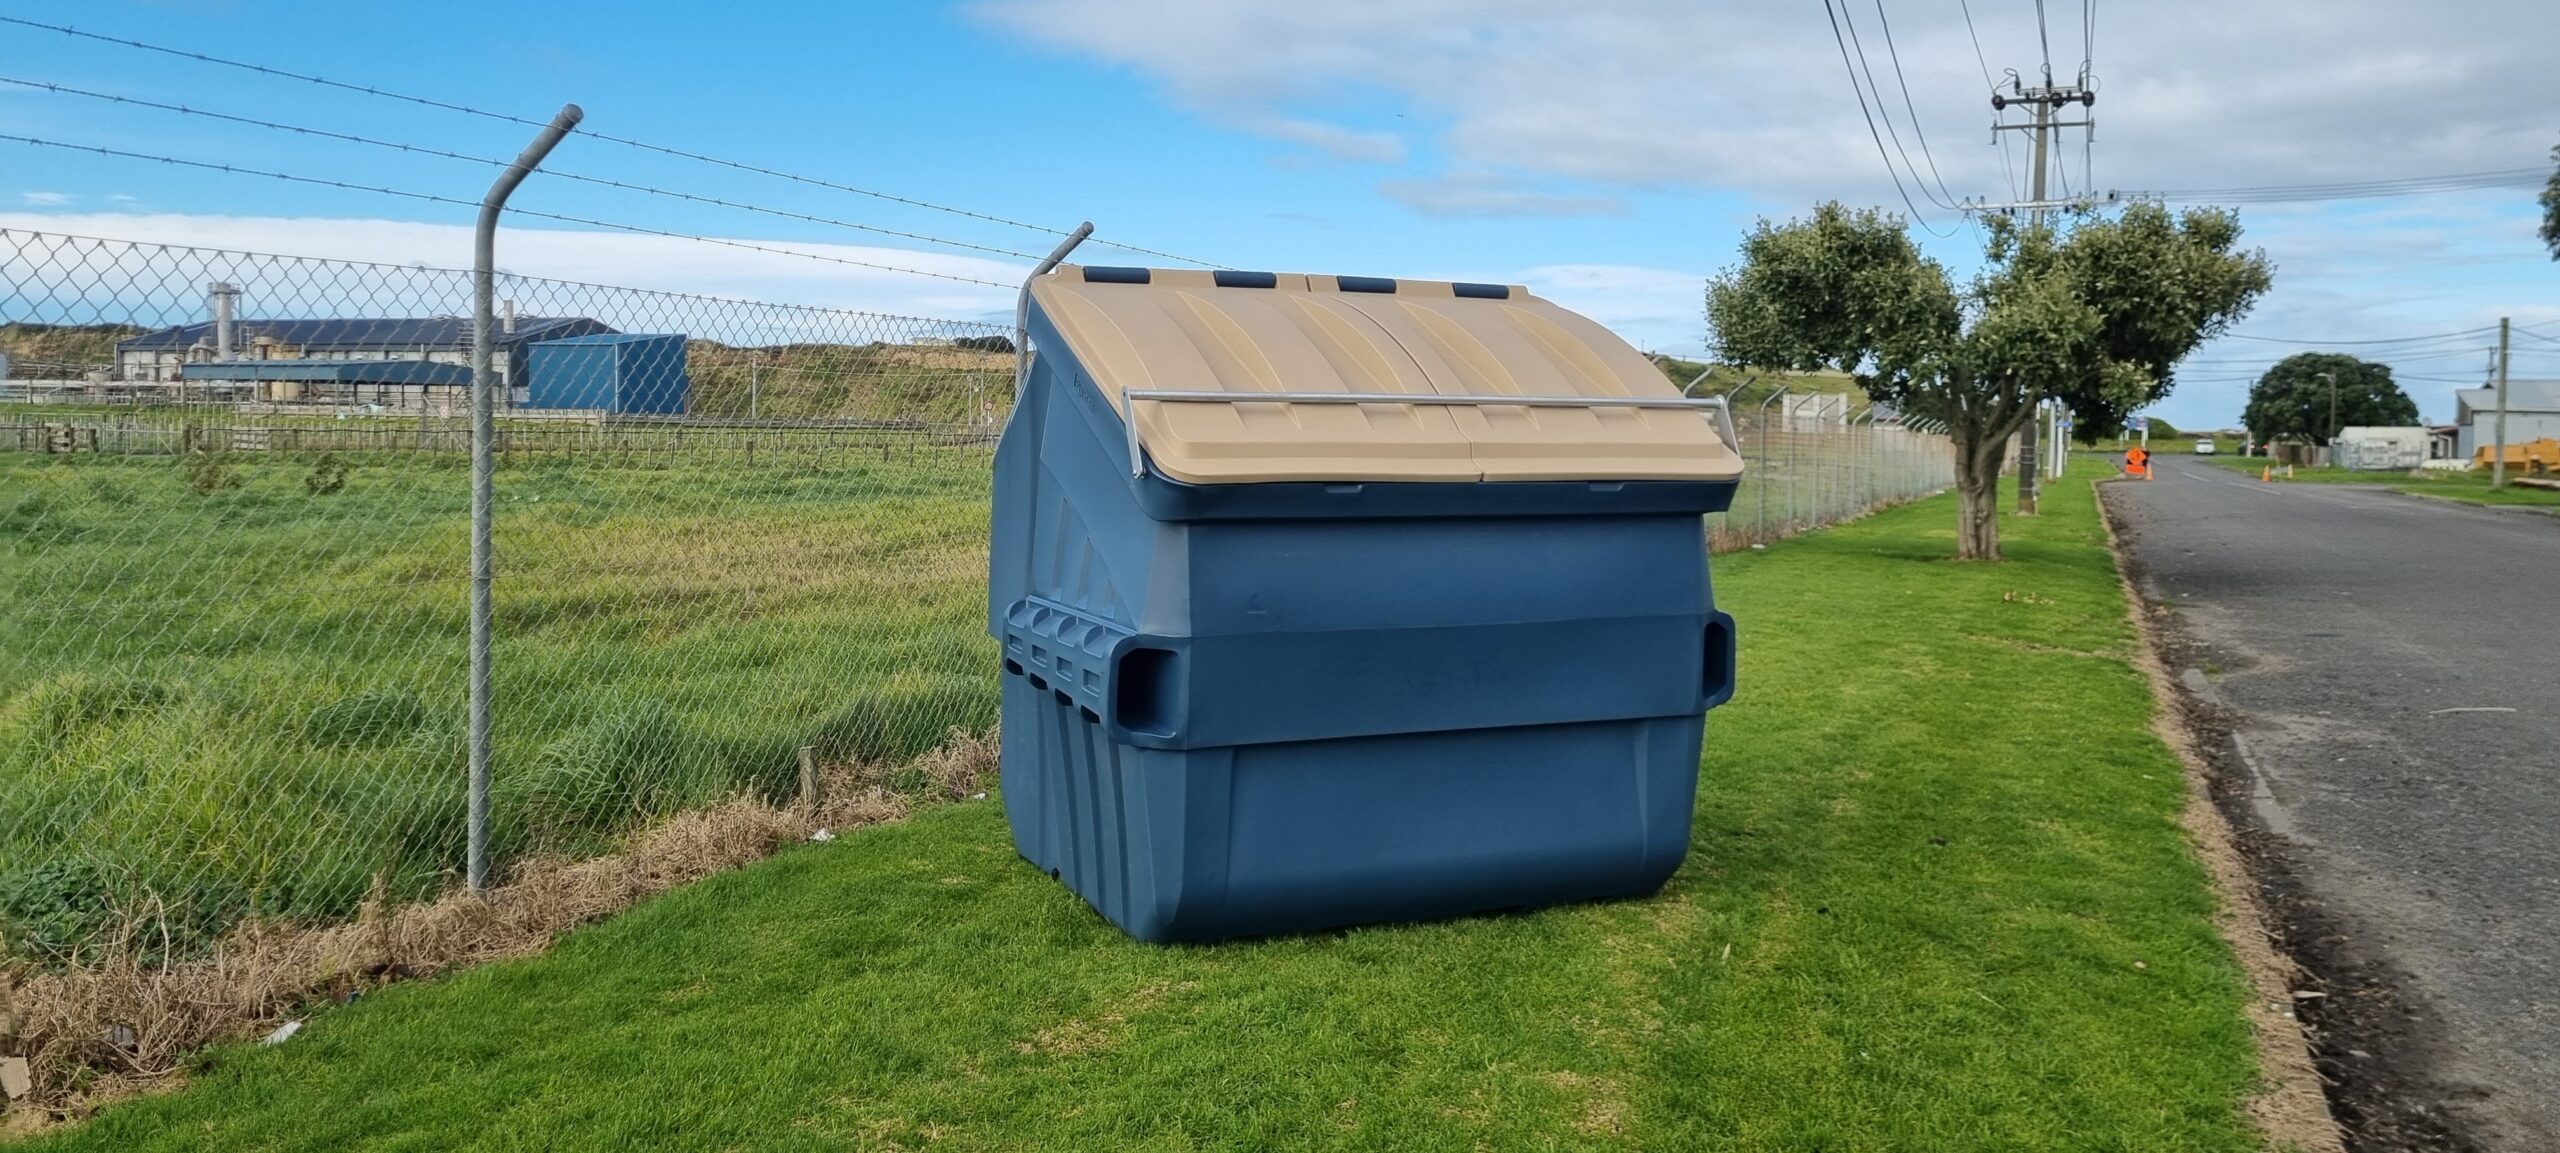 blue front load plastic bin recycling waste management